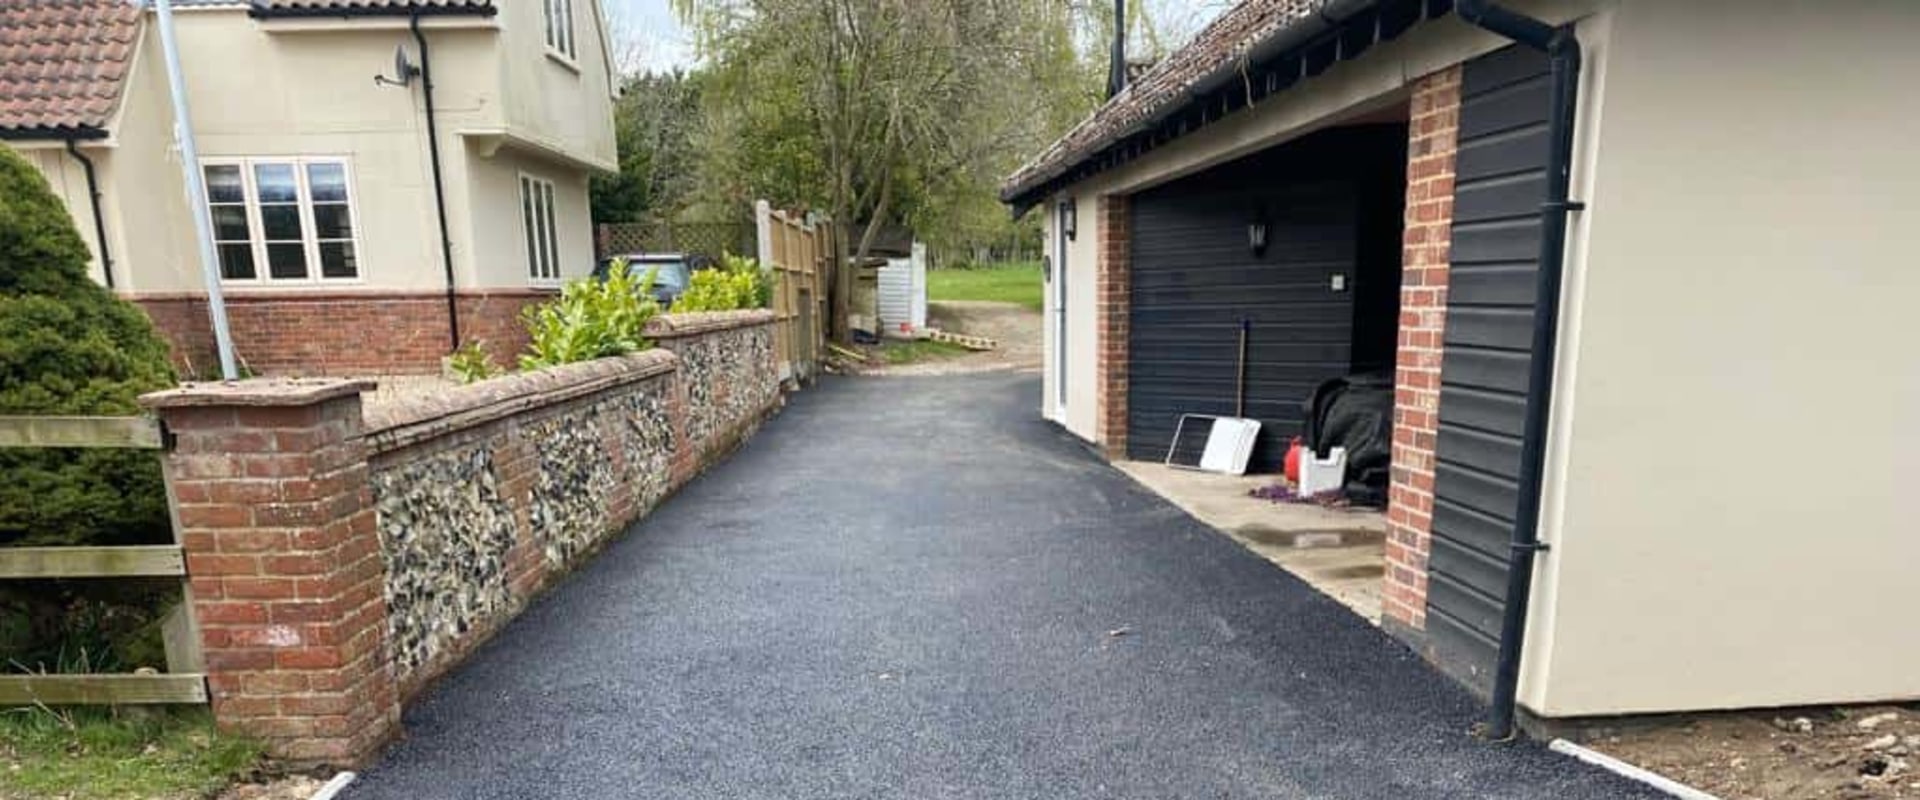 A Comprehensive Guide to Driveway and Sidewalk Installation